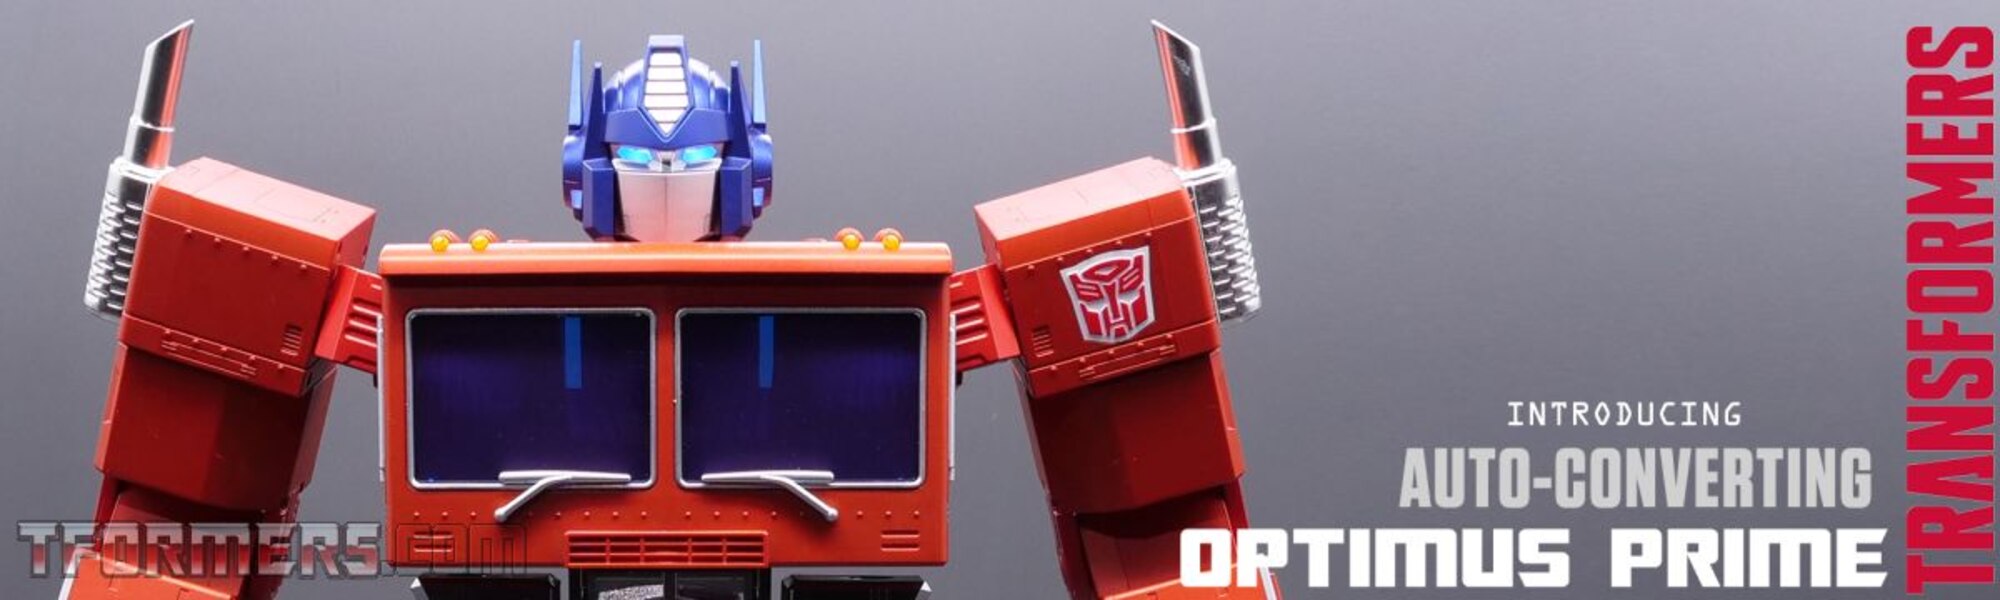 Transformers Optimus Prime Auto Converting Programmable Advanced Robot  (16 of 16)